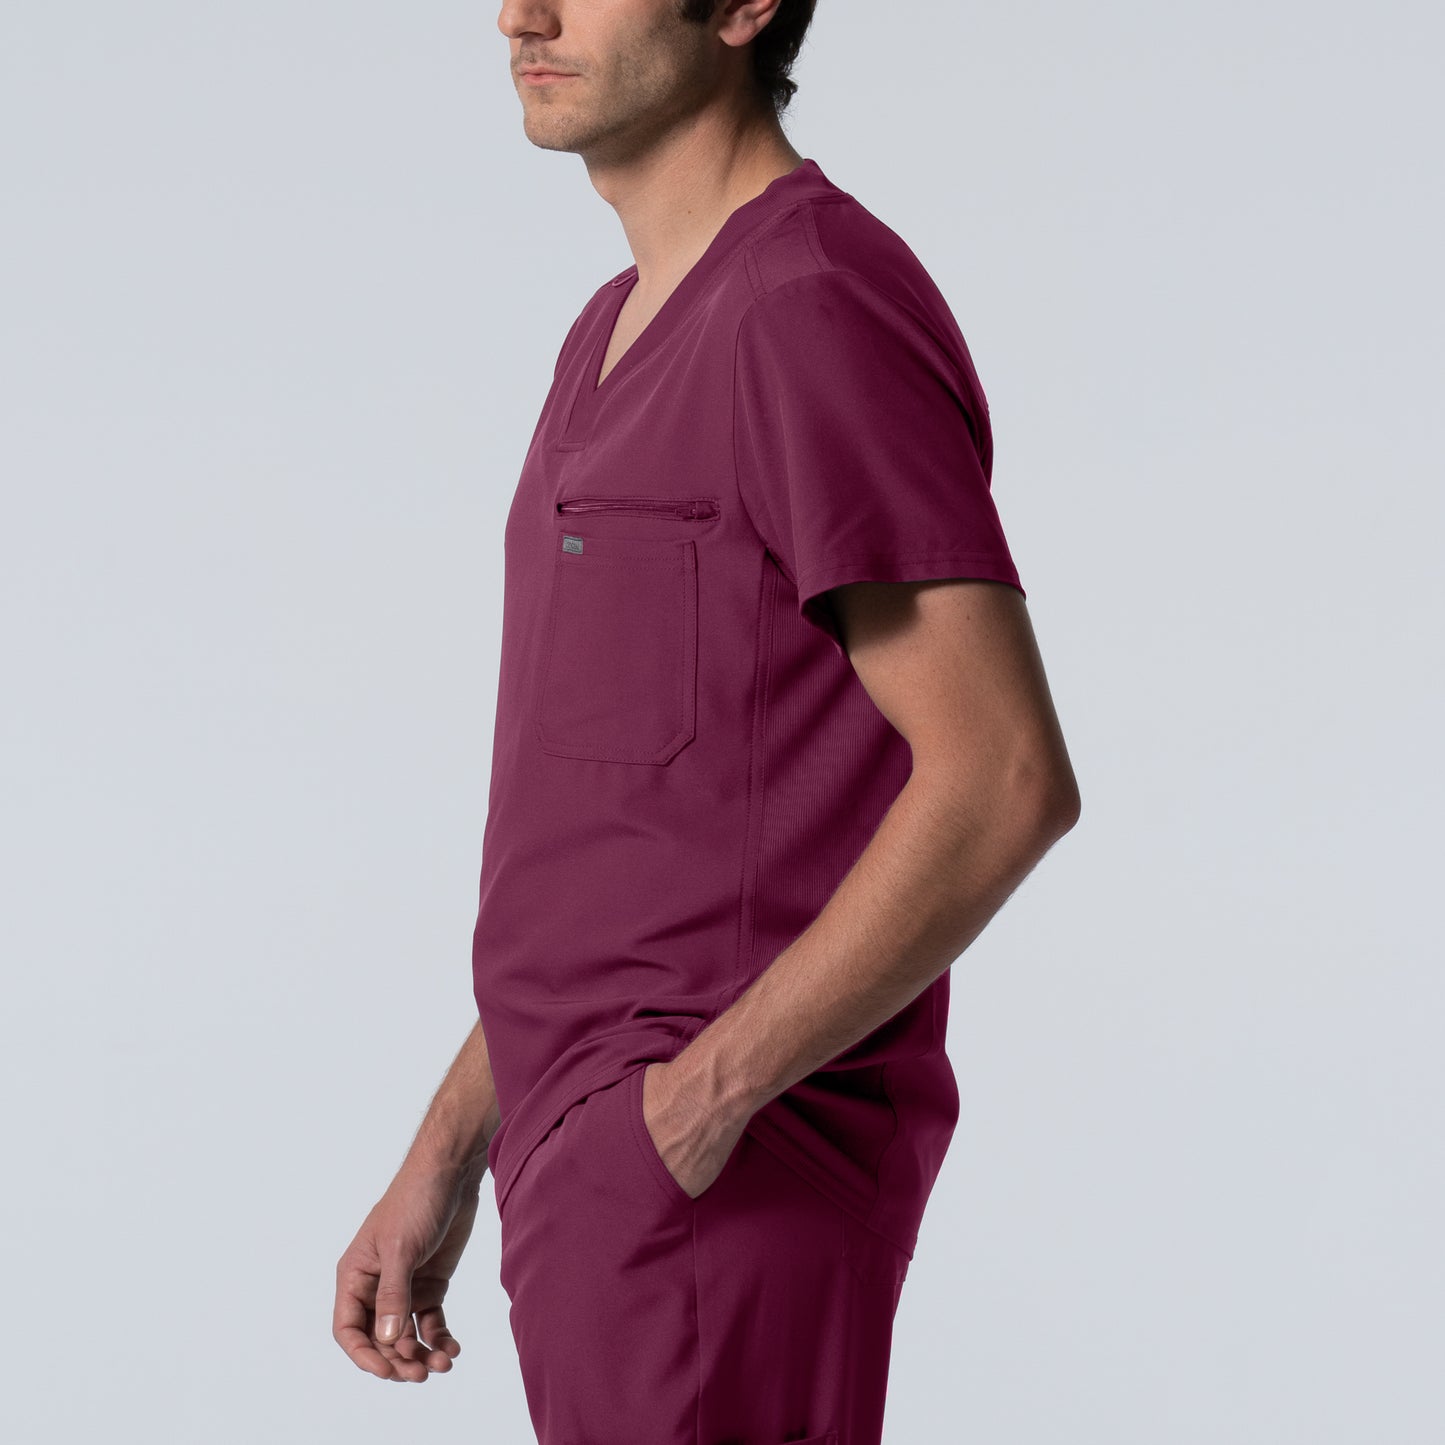 Men's top with two pockets - FORWARD - L111H